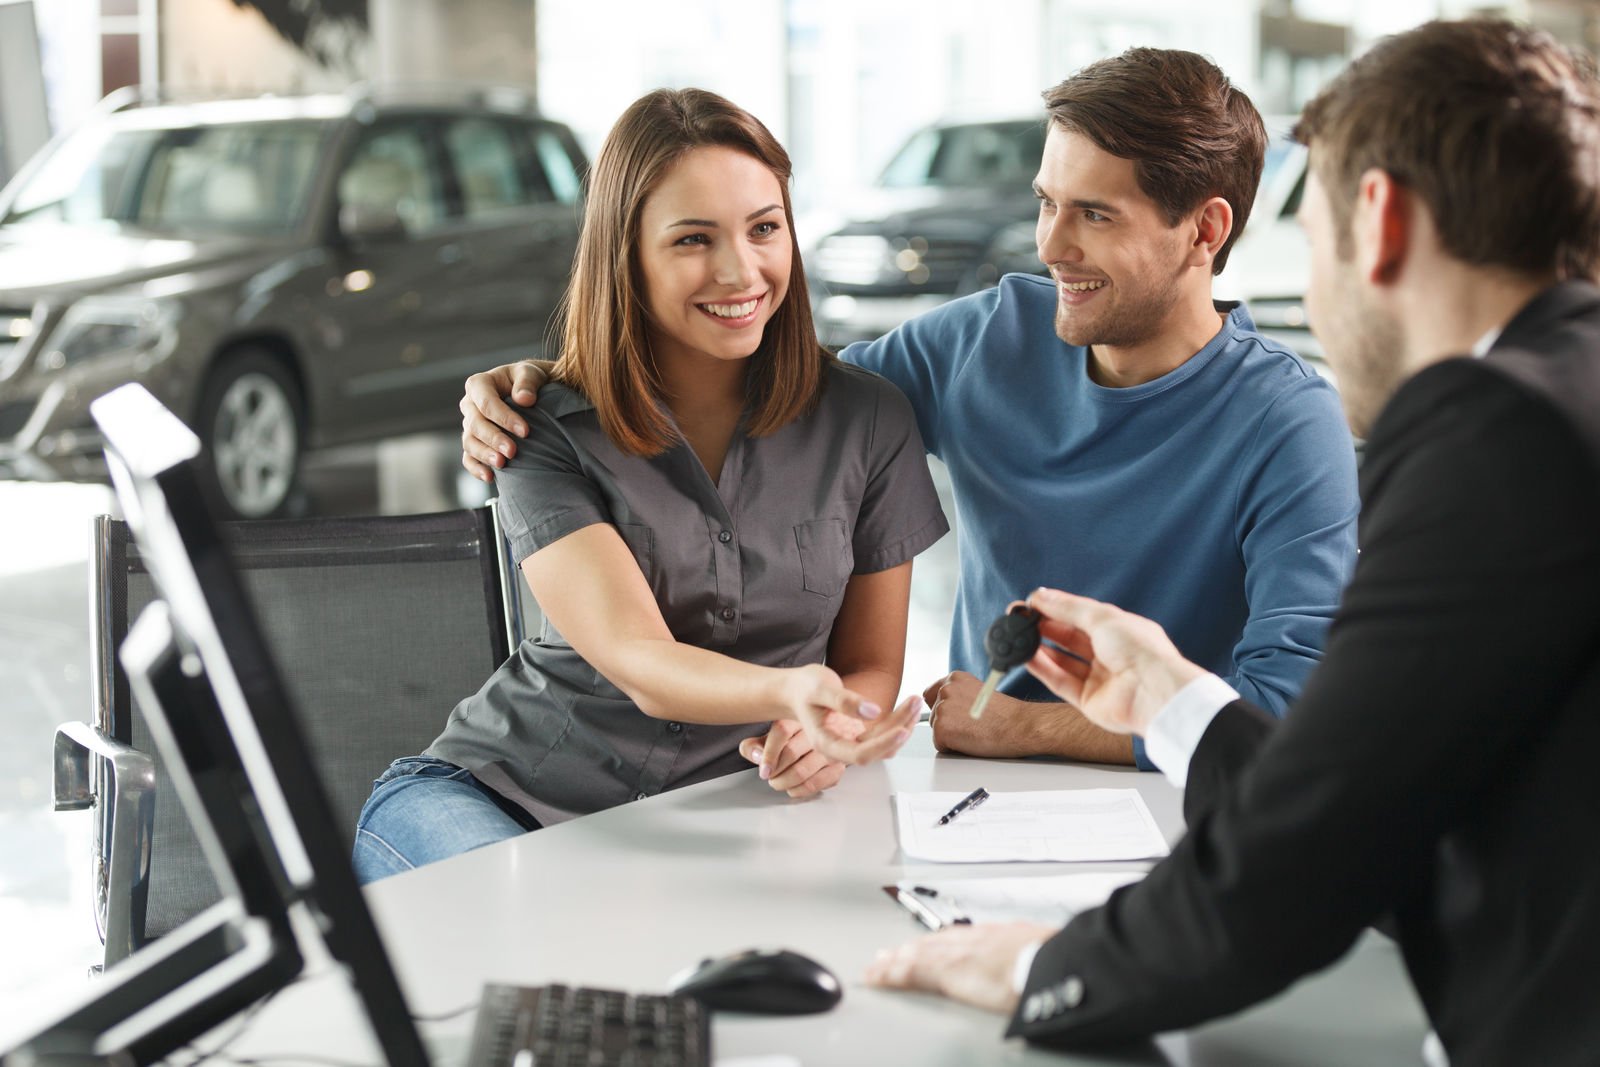 Do you need insurance to test drive a car at the dealership?